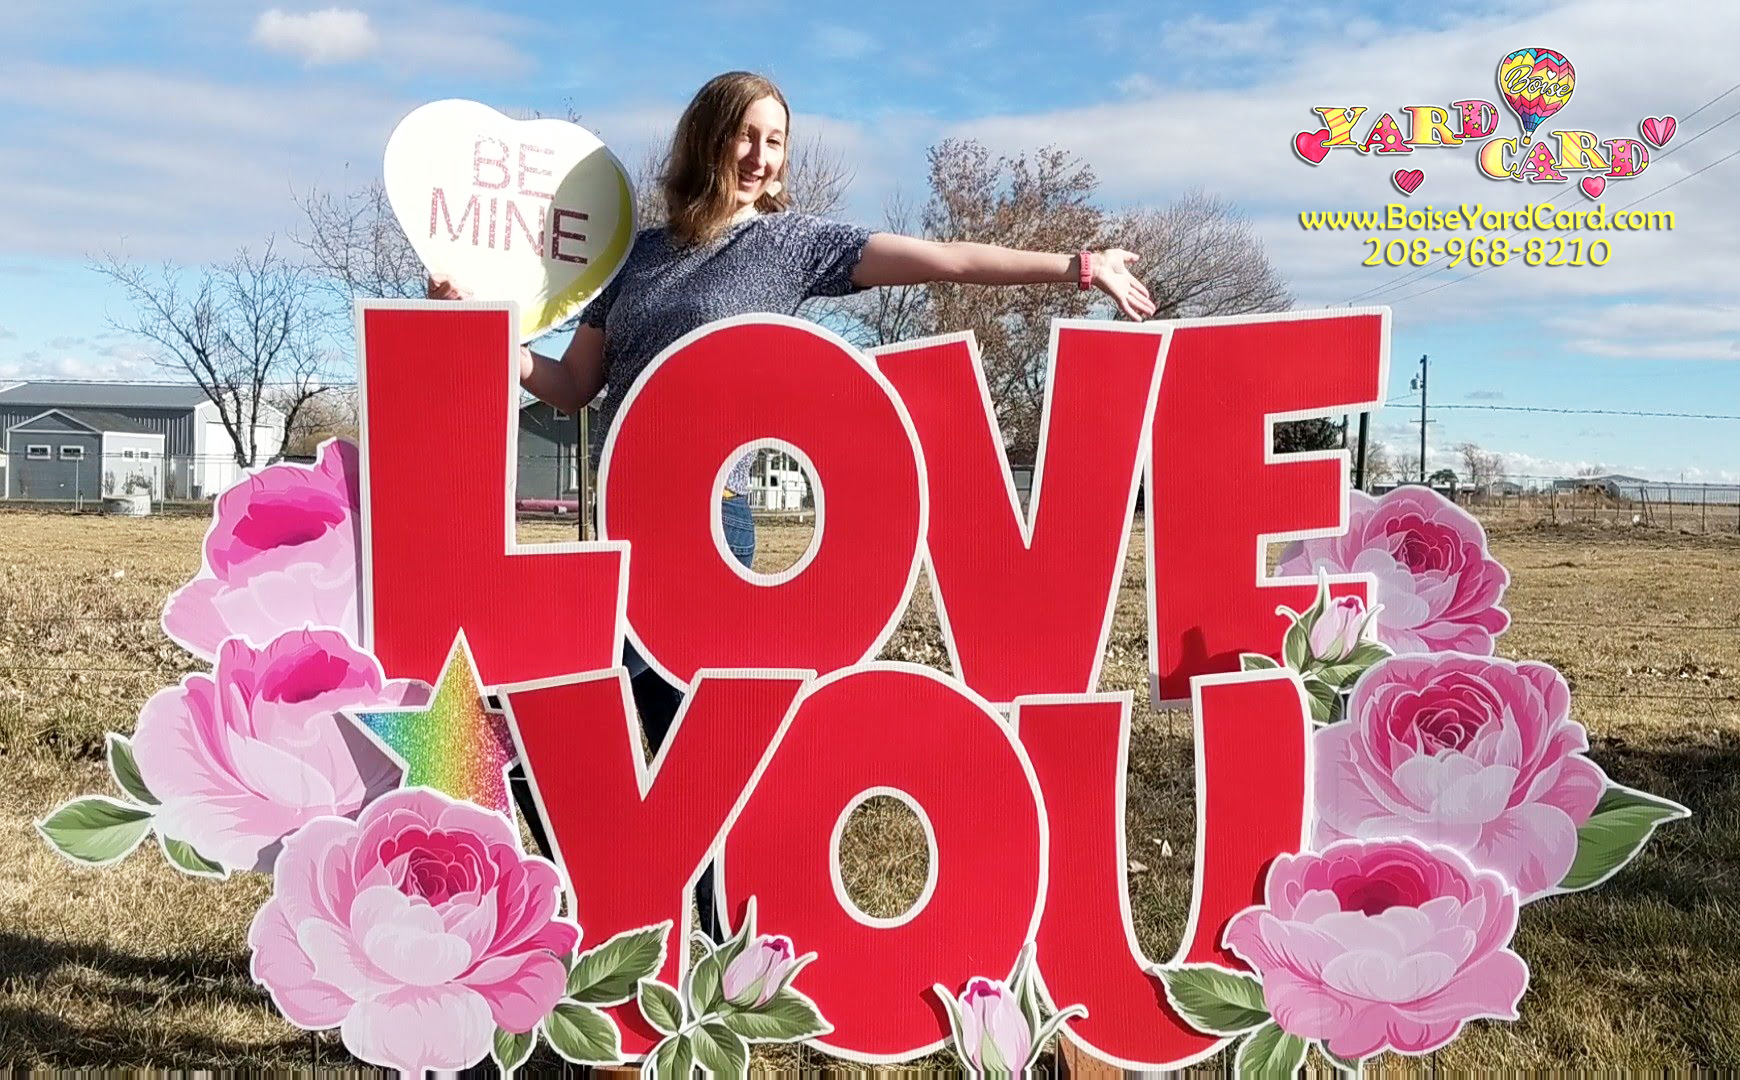 Love You in red and pink Valentine's day lawn greeting Boise Yard Card